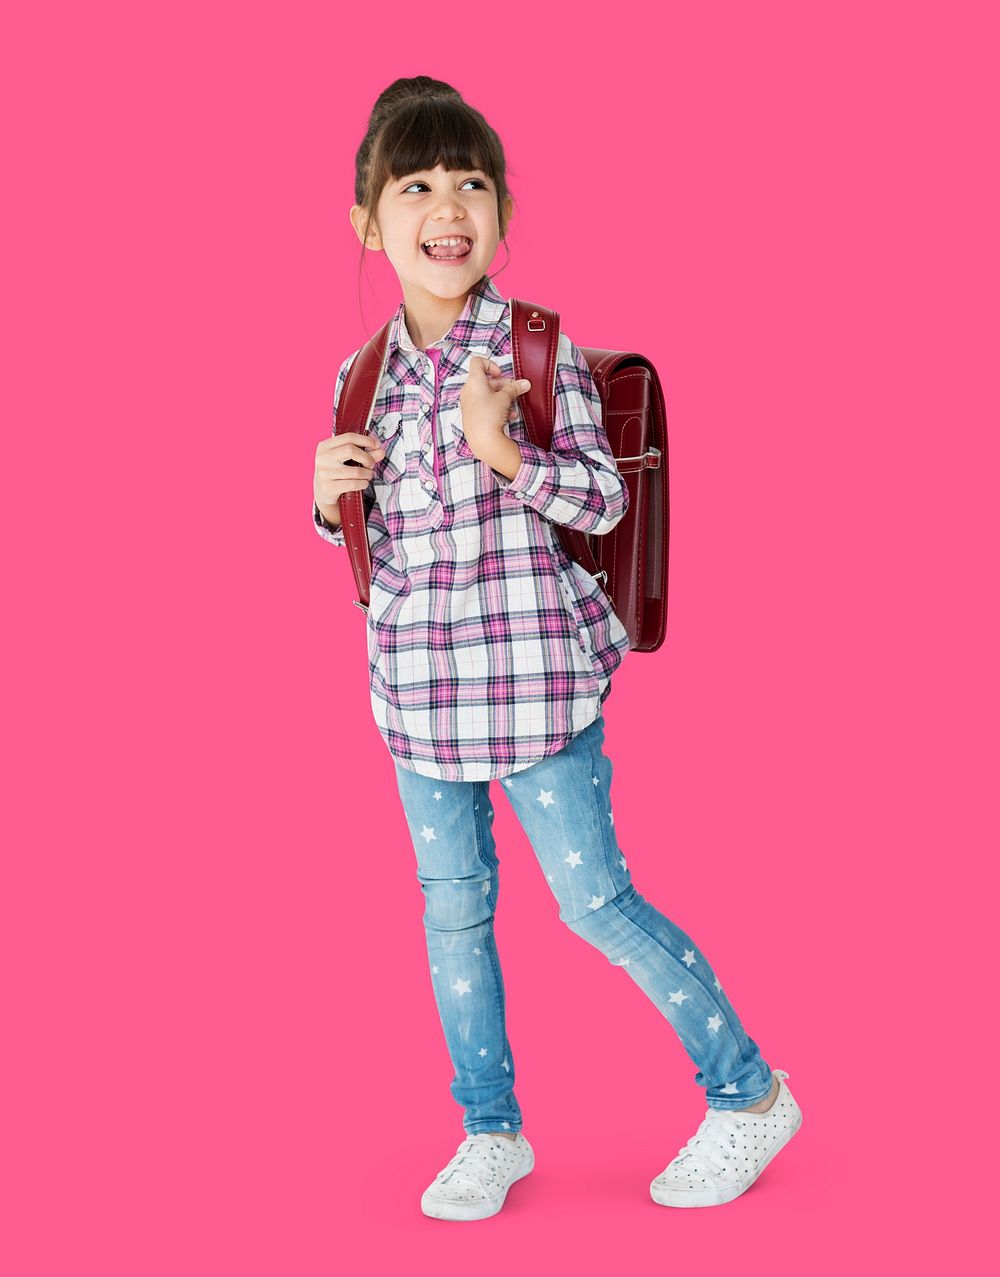 A girl with backpack is smiling